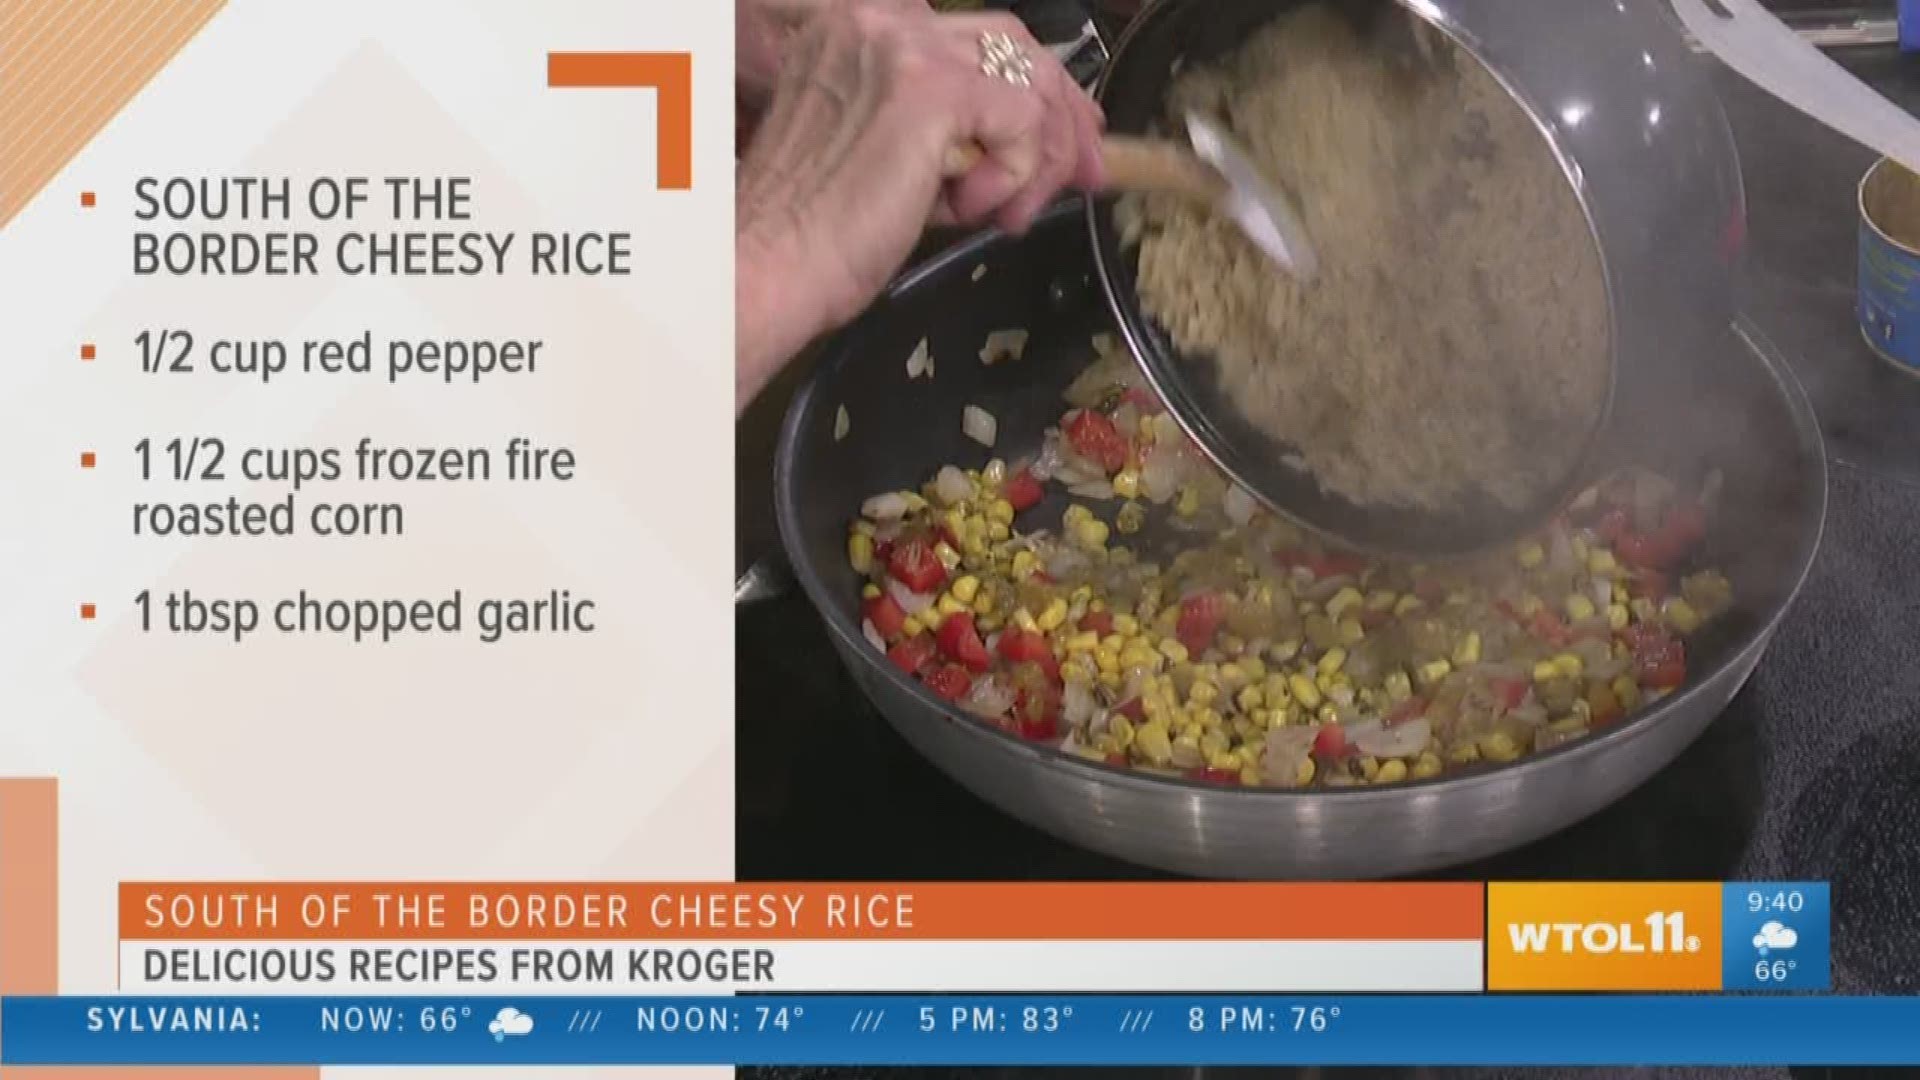 Go south of the border with this awesome cheesy rice recipe from Kroger!